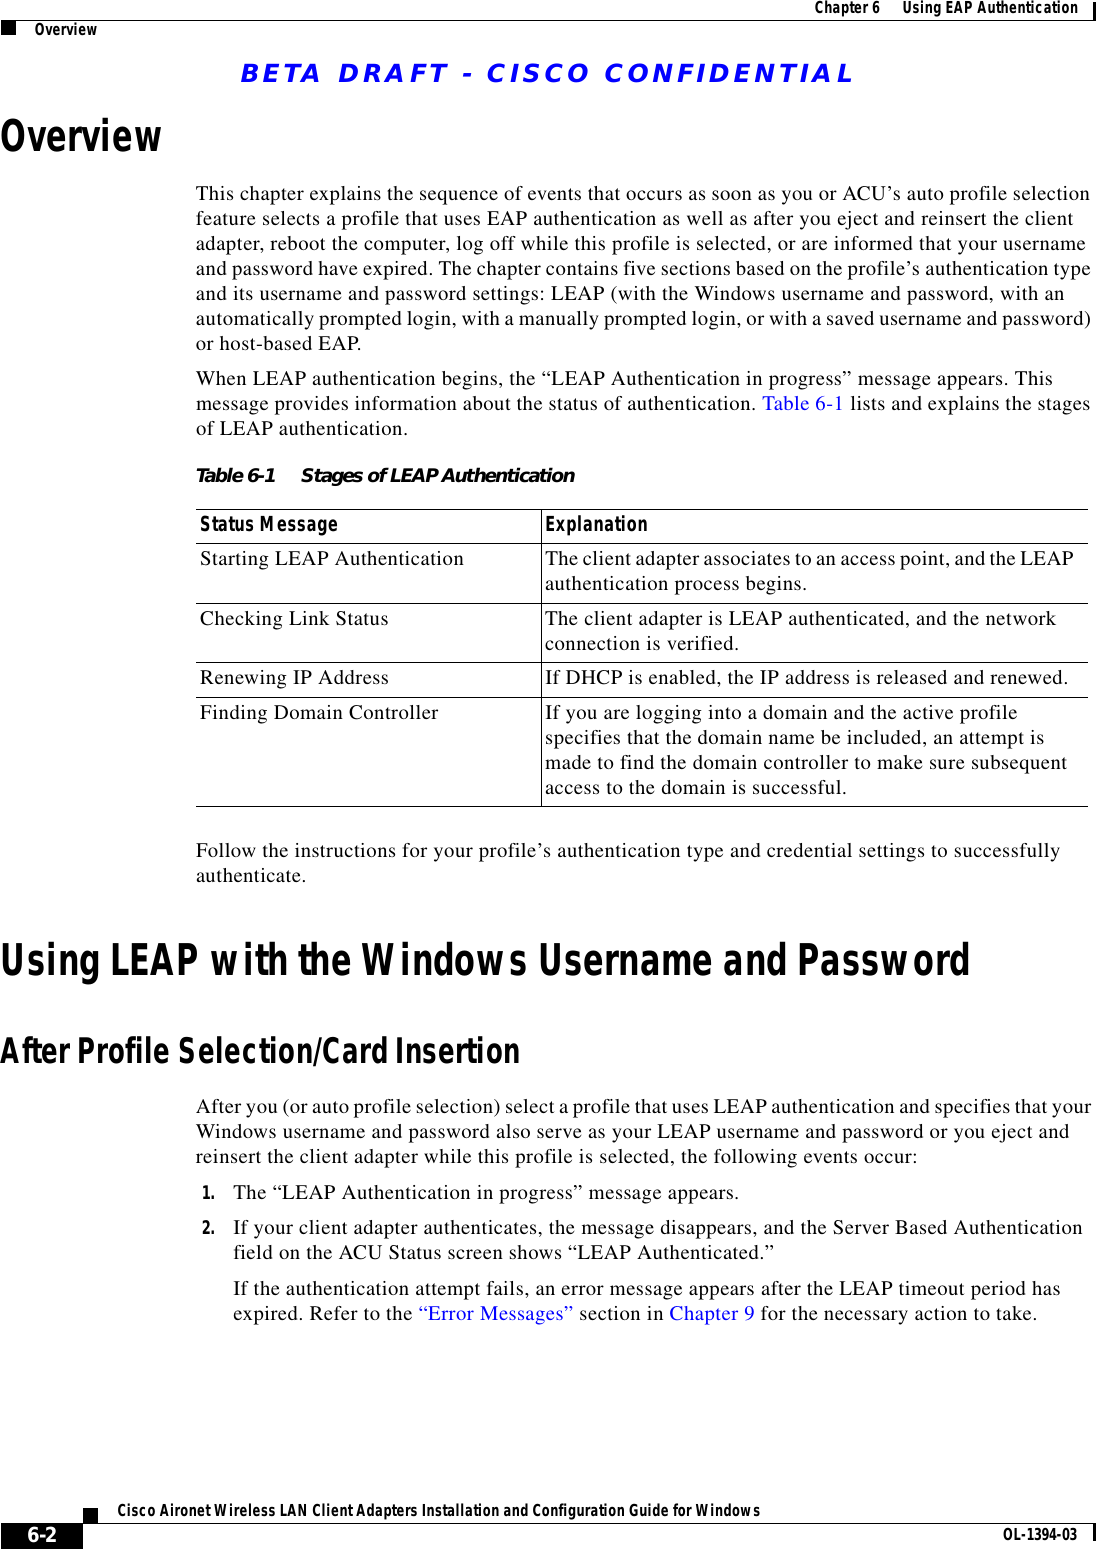 BETA DRAFT - CISCO CONFIDENTIAL6-2Cisco Aironet Wireless LAN Client Adapters Installation and Configuration Guide for Windows OL-1394-03Chapter 6      Using EAP AuthenticationOverviewOverviewThis chapter explains the sequence of events that occurs as soon as you or ACU’s auto profile selection feature selects a profile that uses EAP authentication as well as after you eject and reinsert the client adapter, reboot the computer, log off while this profile is selected, or are informed that your username and password have expired. The chapter contains five sections based on the profile’s authentication type and its username and password settings: LEAP (with the Windows username and password, with an automatically prompted login, with a manually prompted login, or with a saved username and password) or host-based EAP.When LEAP authentication begins, the “LEAP Authentication in progress” message appears. This message provides information about the status of authentication. Table 6-1 lists and explains the stages of LEAP authentication.Follow the instructions for your profile’s authentication type and credential settings to successfully authenticate.Using LEAP with the Windows Username and PasswordAfter Profile Selection/Card InsertionAfter you (or auto profile selection) select a profile that uses LEAP authentication and specifies that your Windows username and password also serve as your LEAP username and password or you eject and reinsert the client adapter while this profile is selected, the following events occur:1. The “LEAP Authentication in progress” message appears.2. If your client adapter authenticates, the message disappears, and the Server Based Authentication field on the ACU Status screen shows “LEAP Authenticated.”If the authentication attempt fails, an error message appears after the LEAP timeout period has expired. Refer to the “Error Messages” section in Chapter 9 for the necessary action to take.Table 6-1 Stages of LEAP Authentication Status Message ExplanationStarting LEAP Authentication The client adapter associates to an access point, and the LEAP authentication process begins.Checking Link Status The client adapter is LEAP authenticated, and the network connection is verified.Renewing IP Address If DHCP is enabled, the IP address is released and renewed.Finding Domain Controller If you are logging into a domain and the active profile specifies that the domain name be included, an attempt is made to find the domain controller to make sure subsequent access to the domain is successful.